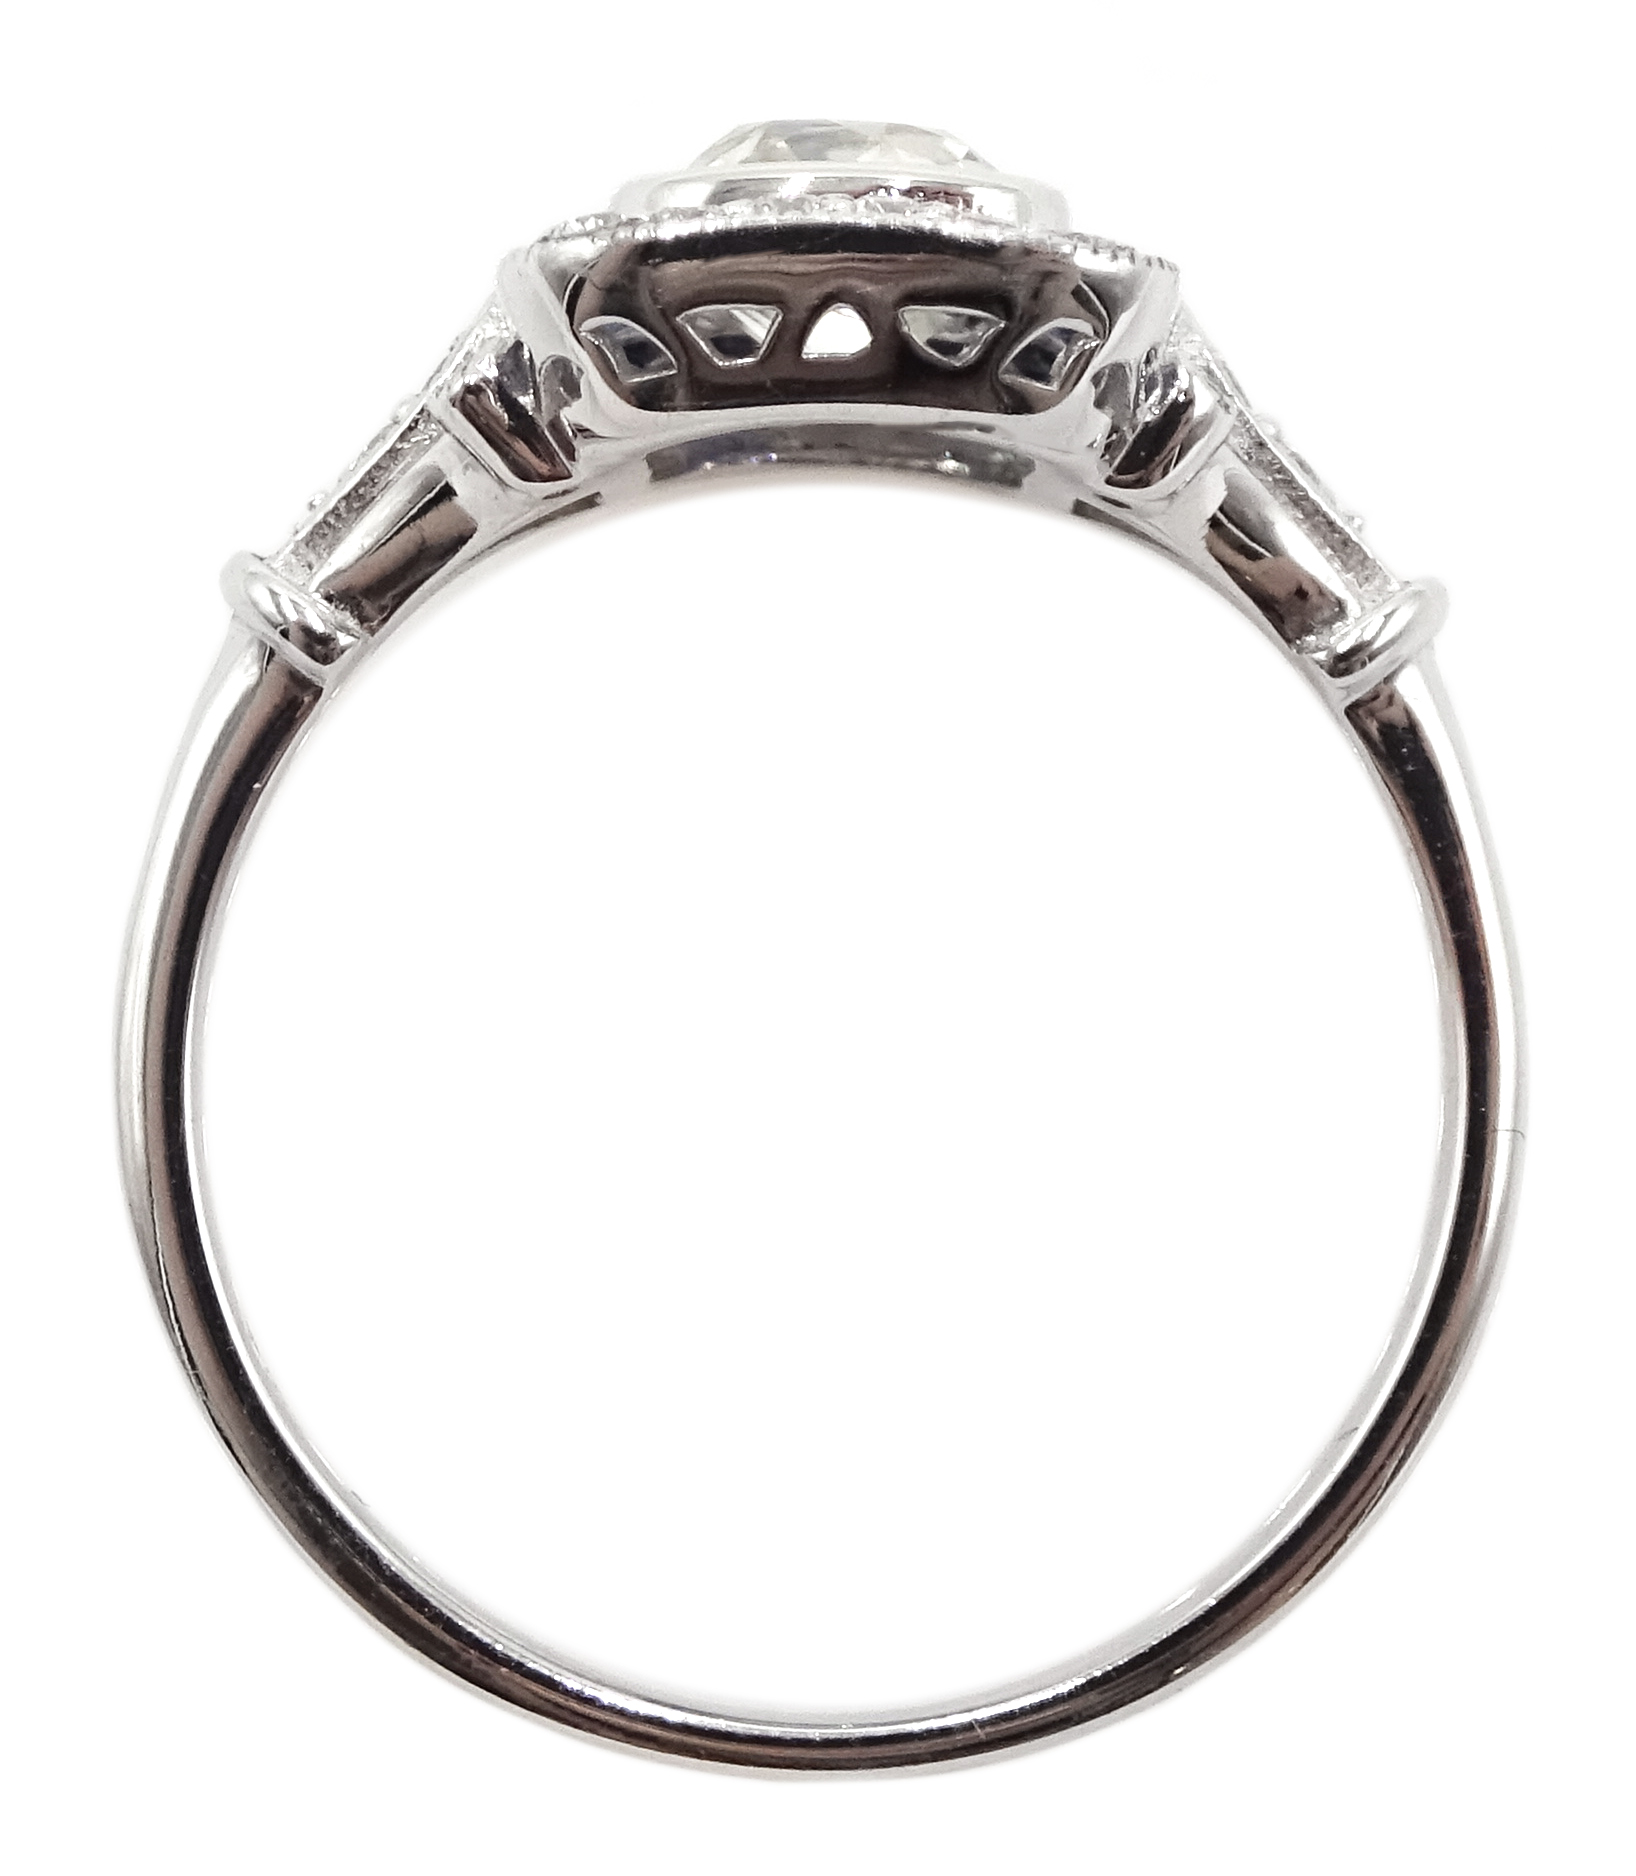 Art Deco style 18ct white gold, sapphire and diamond ring, central old cut diamond surrounded by sa - Image 5 of 6